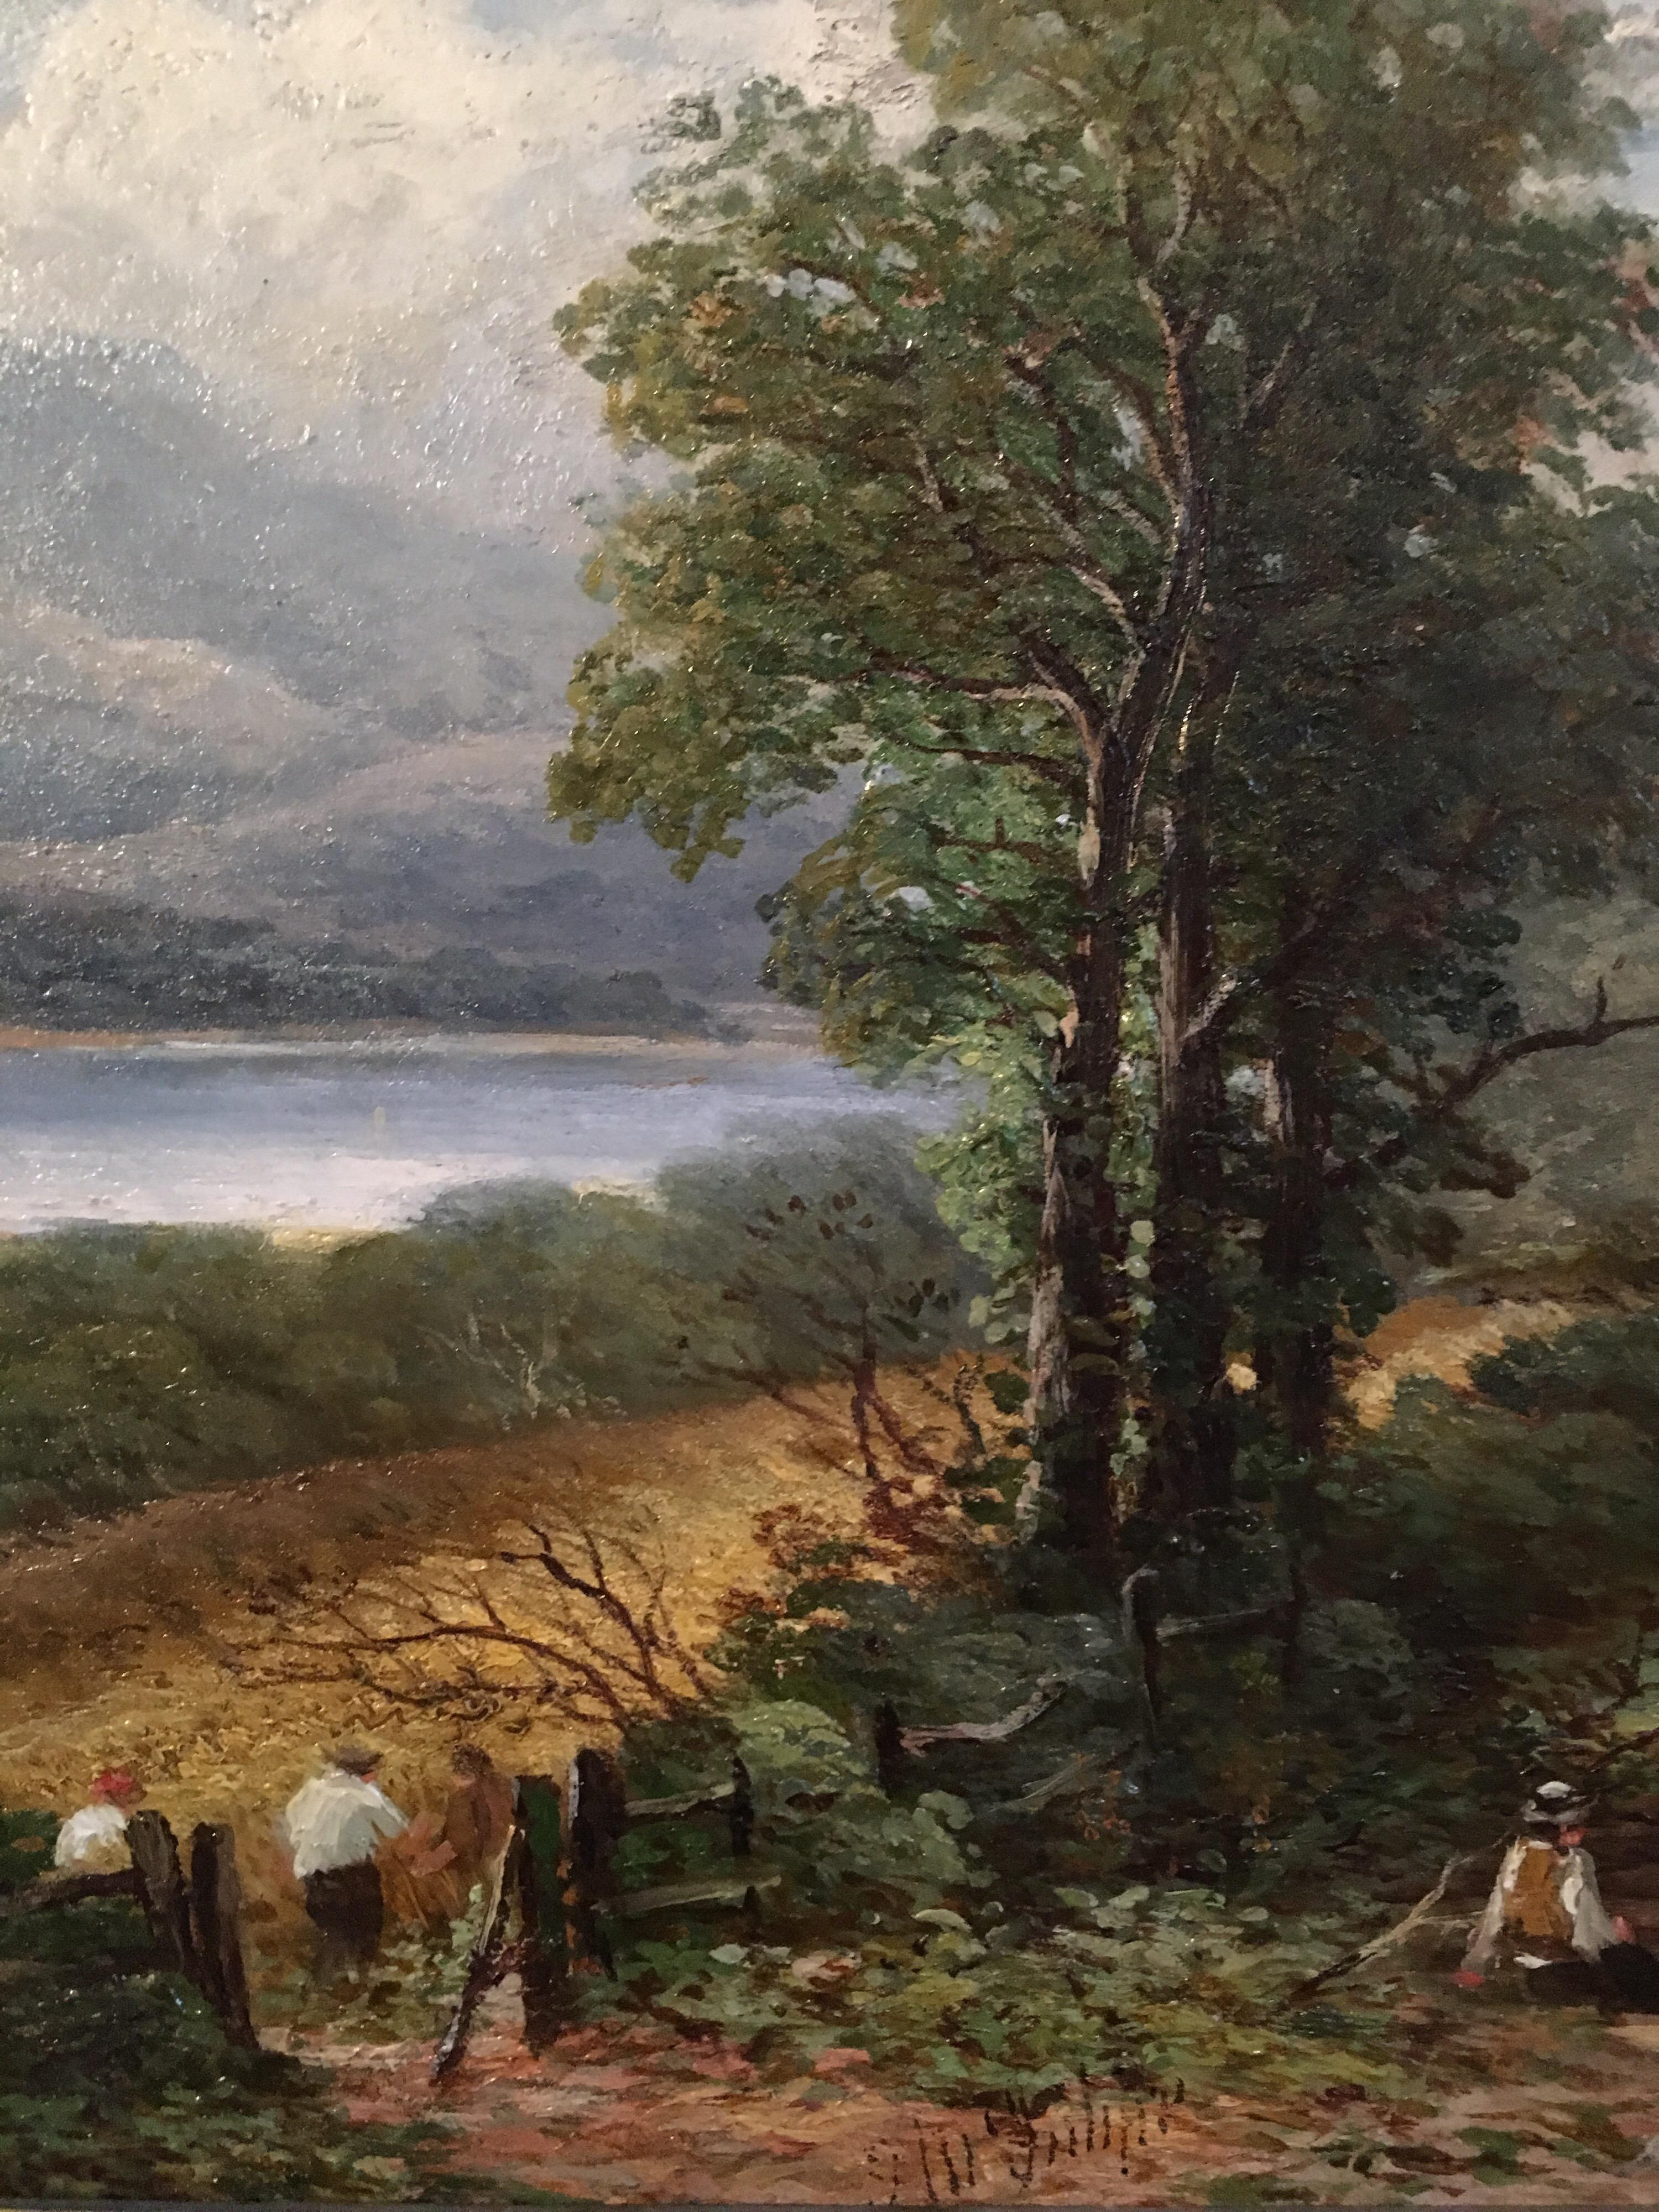 Antique Scottish Landscape, 19th century, Loch Lomond, Signed, Elegant Frame
By British artist 'Joseph Wrightson McIntyre', Mid 19th Century
Signed by the artist on the lower right hand corner and verso
Oil painting on canvas, framed
Framed size: